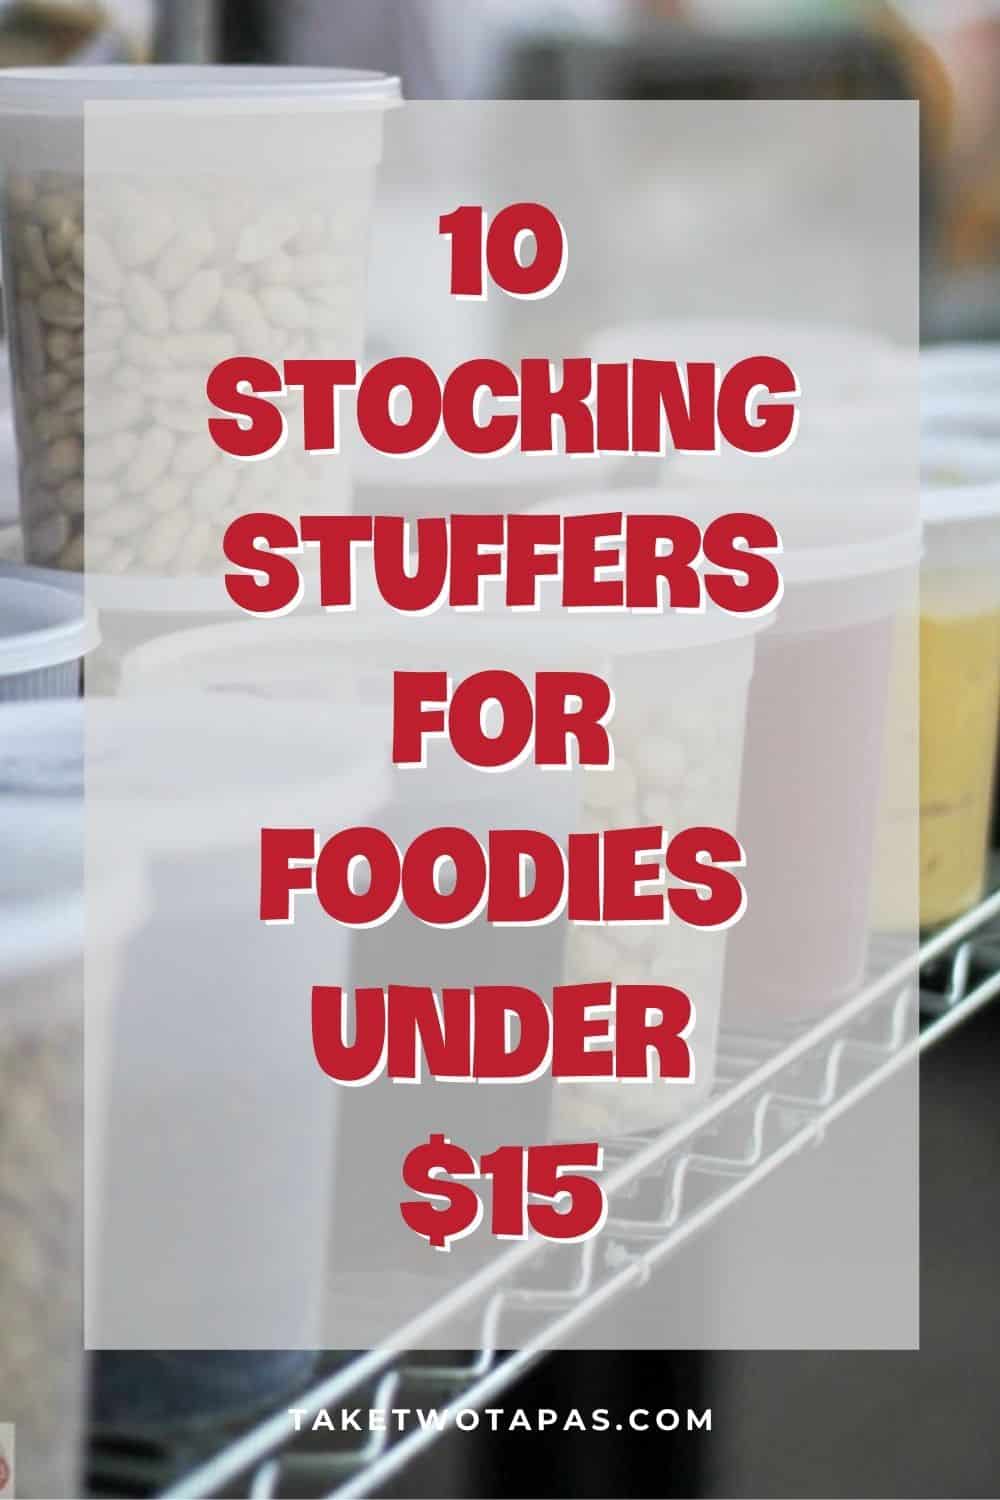 blurred picture with text "15 stocking stuffers for foodies under $15